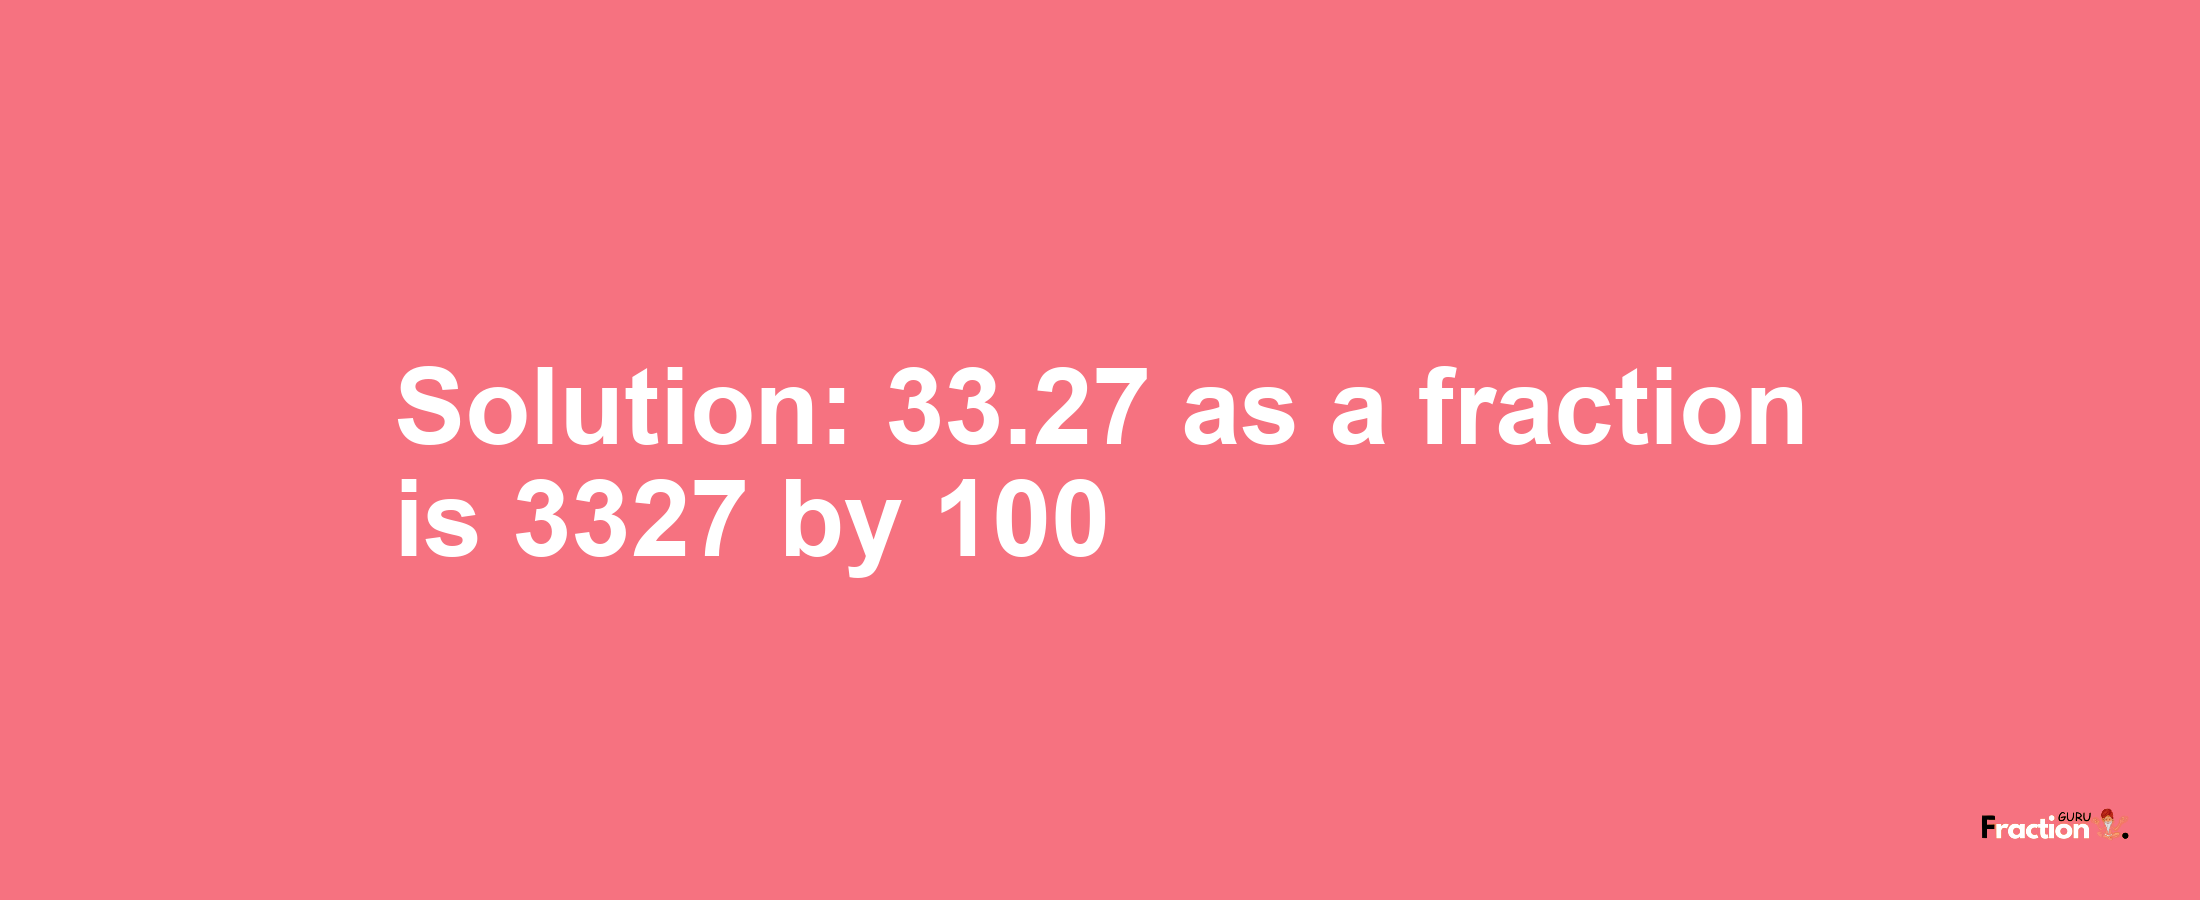 Solution:33.27 as a fraction is 3327/100